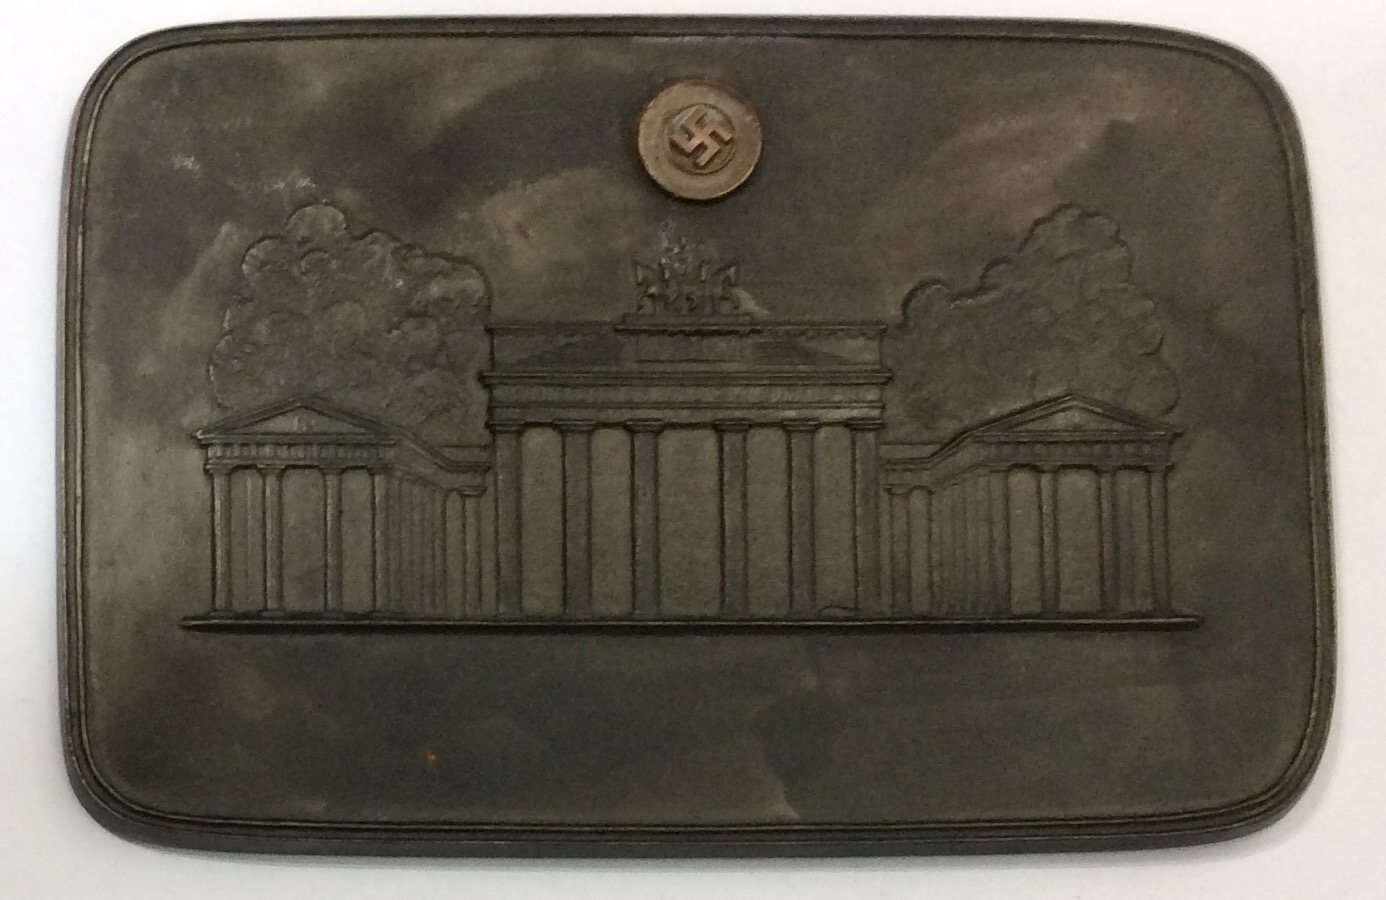 A WORLD WAR II GERMAN CAST IRON BRANDENBURG GATE PLAQUE Relief cast of the gate with a Nazi insignia - Image 2 of 4